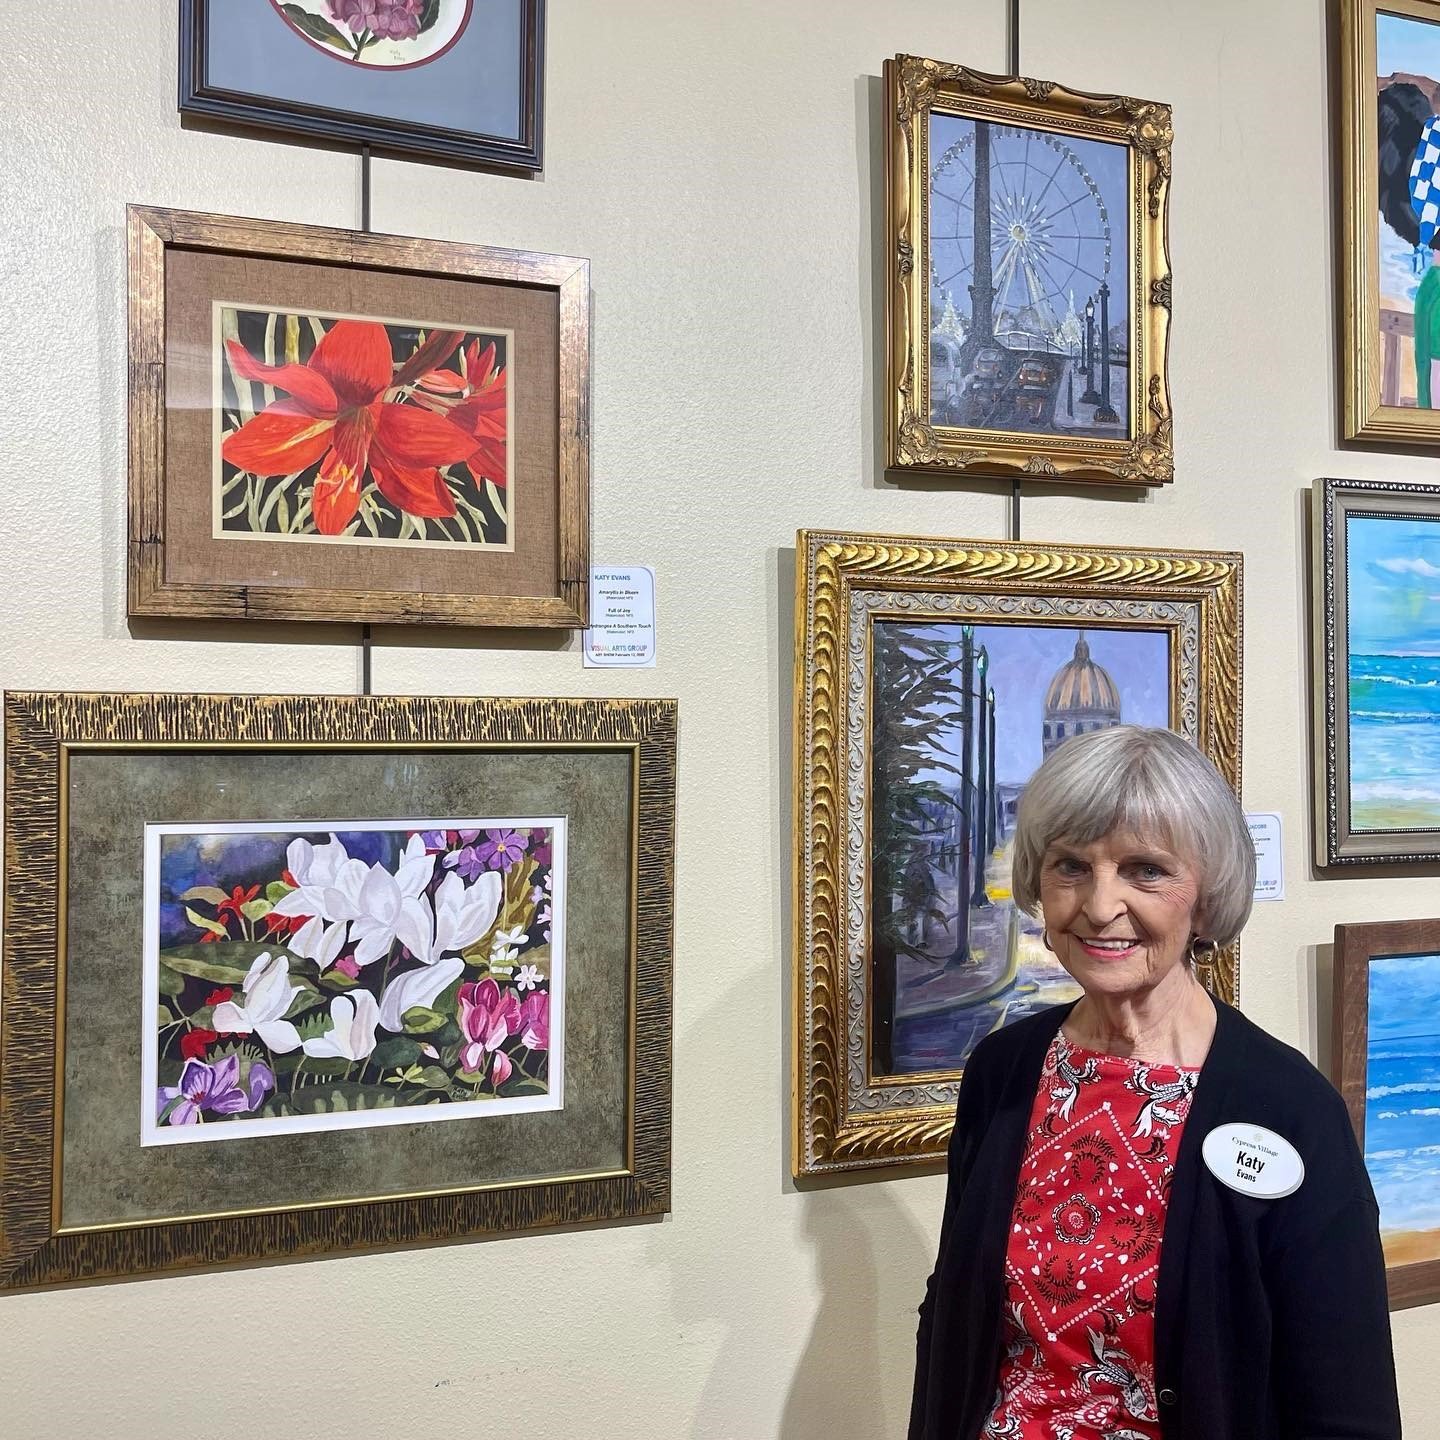 Artist Katy Evans stands next to some of her paintings at the Cypress Village Visual Arts Show.